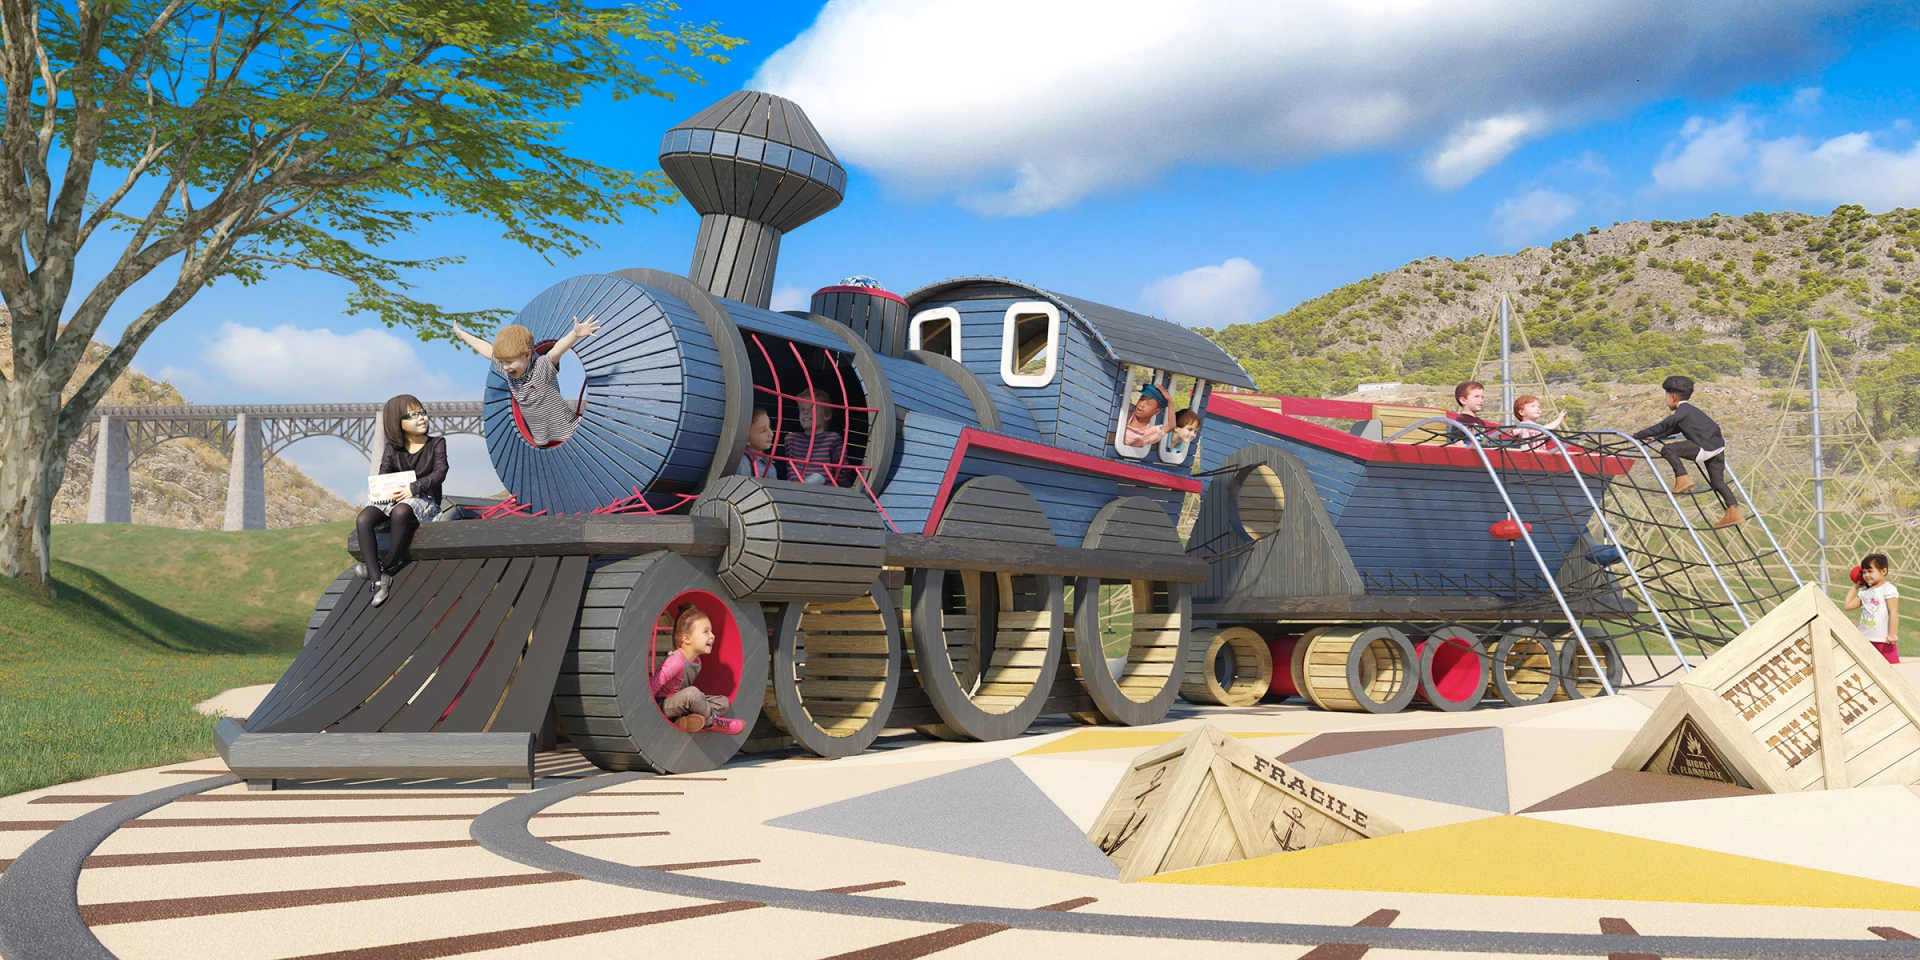 A train themed playground